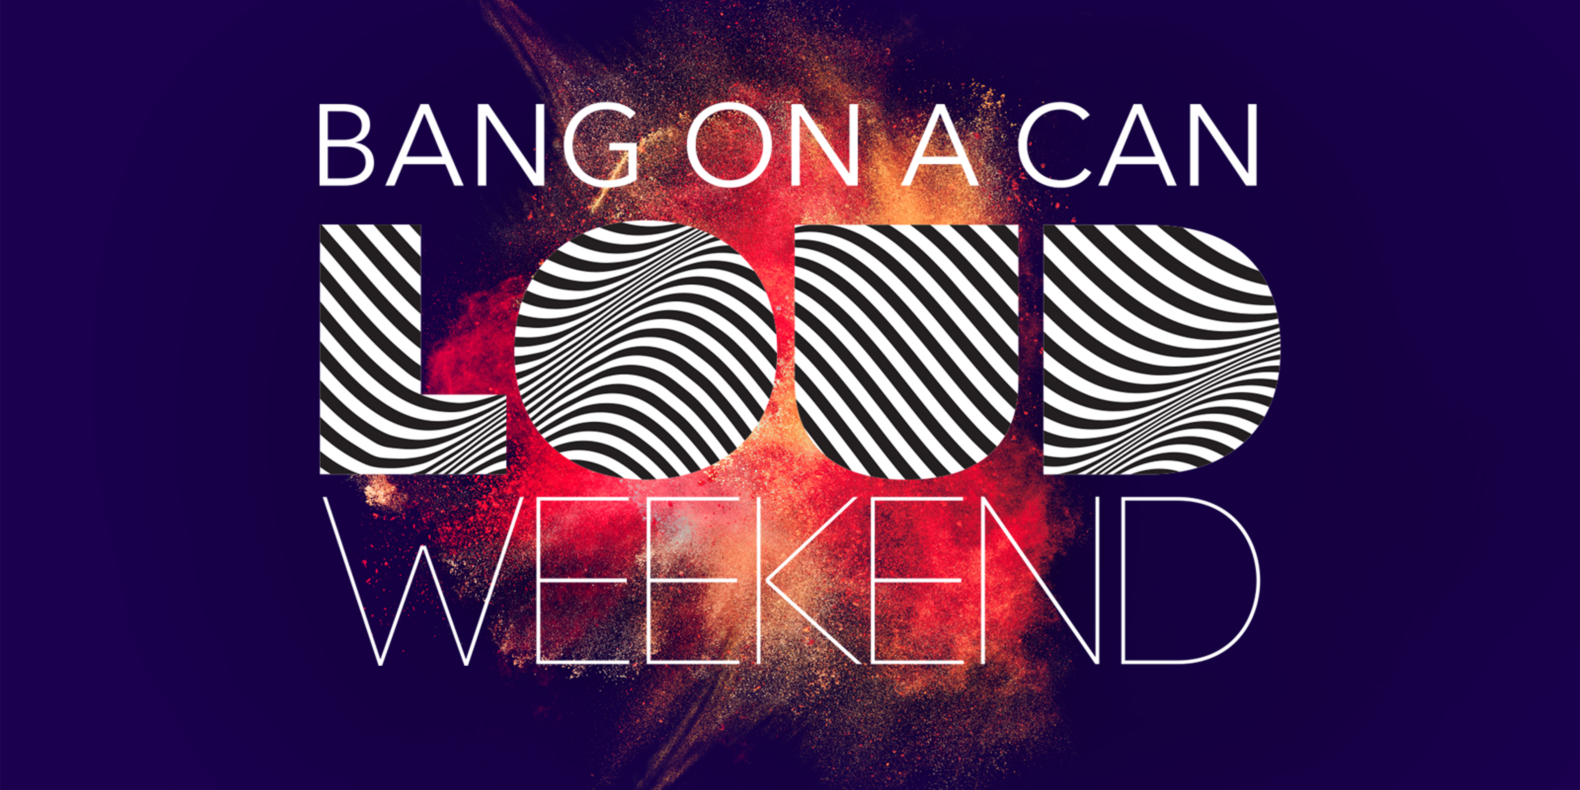 Bang on a Can Loud Weekend